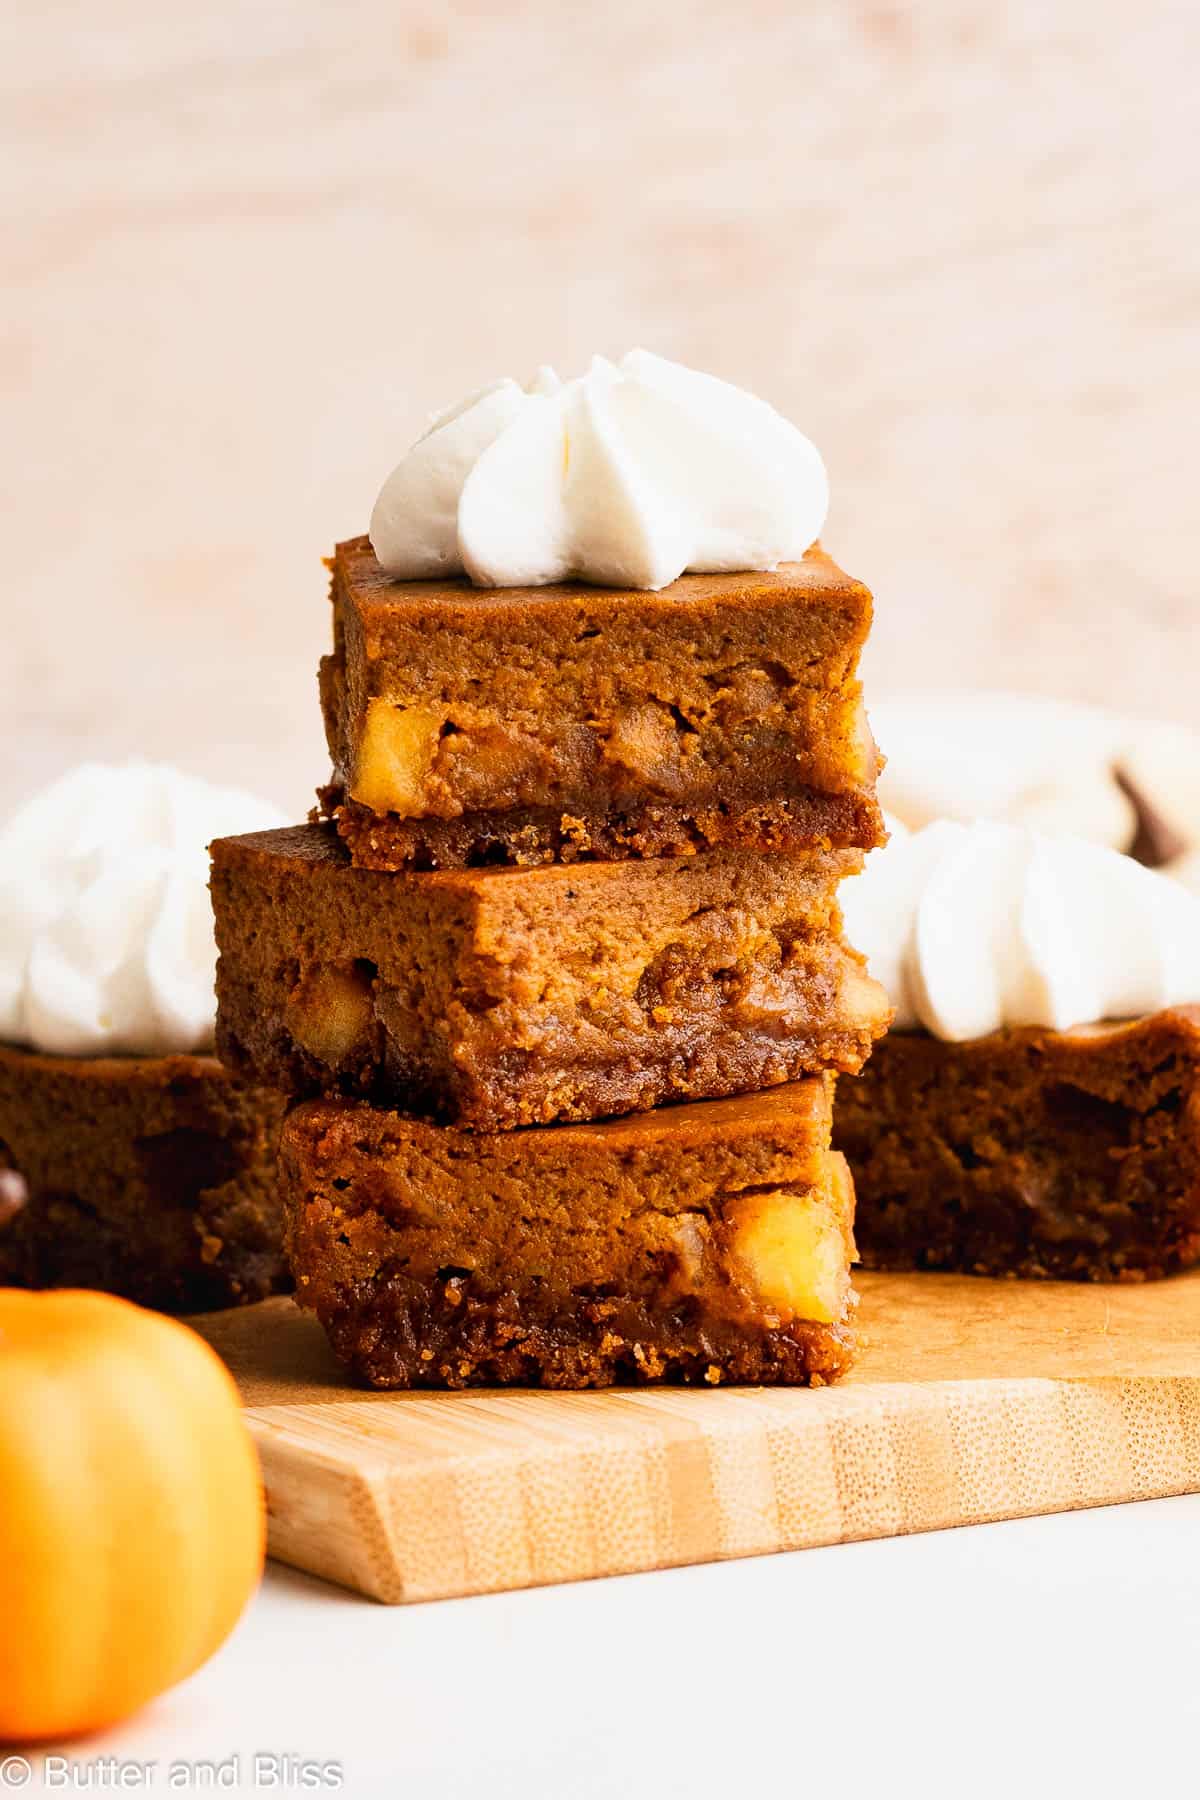 A delicious stack of three gluten free pumpkin apple pie bars on a wood cutting board.